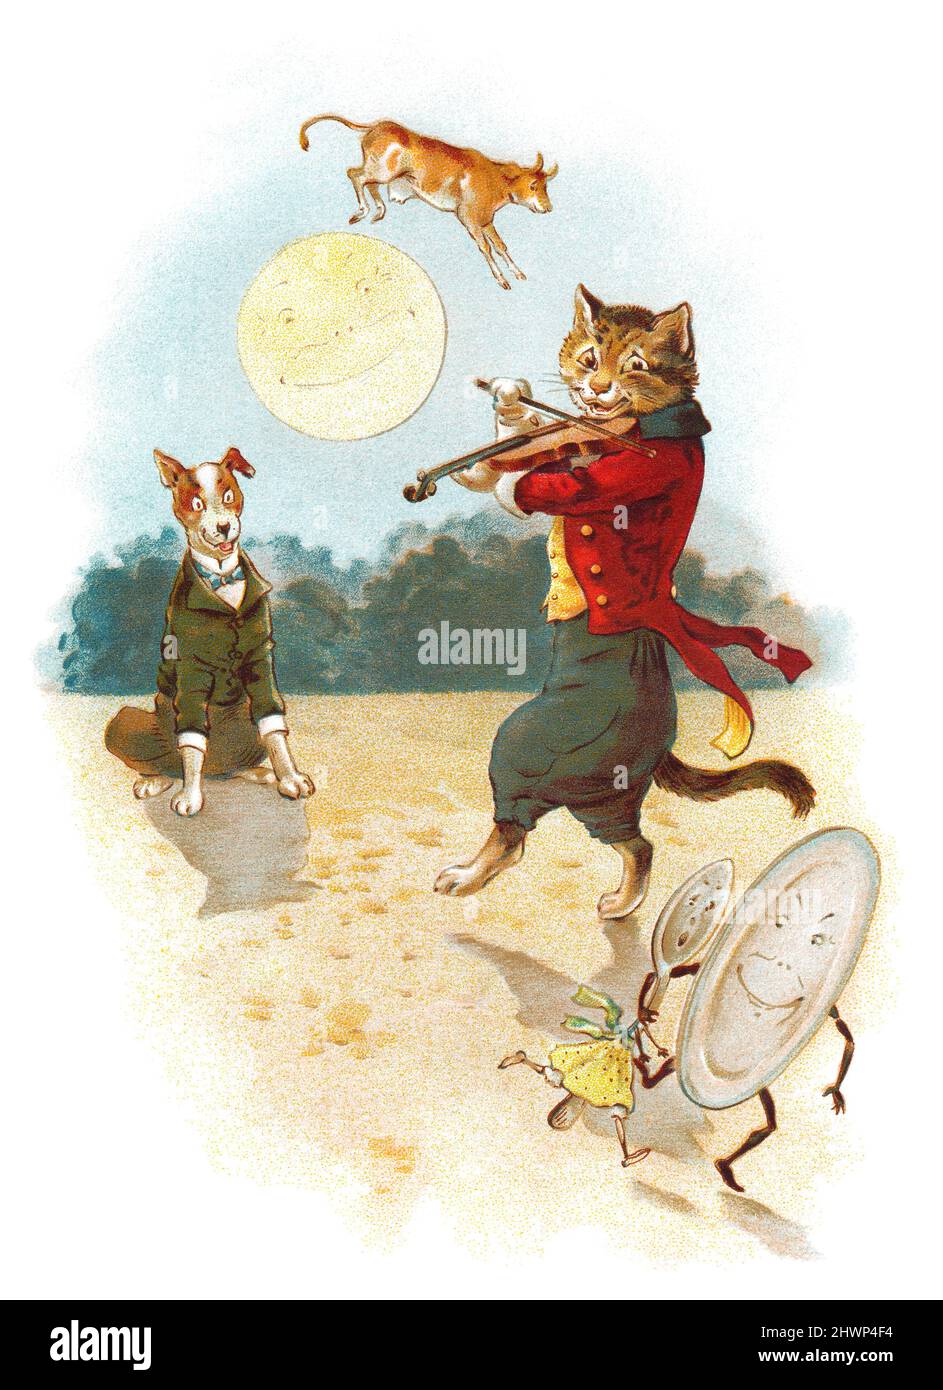 Hey diddle diddle, the cat and the fiddle, the dish ran away with the spoon, the little dog laughed to see such fun and the cow jumped over the moon. 1902 chromo-litho illustration from Mother Goose Jingles. Published by Ernest Nister. Stock Photo